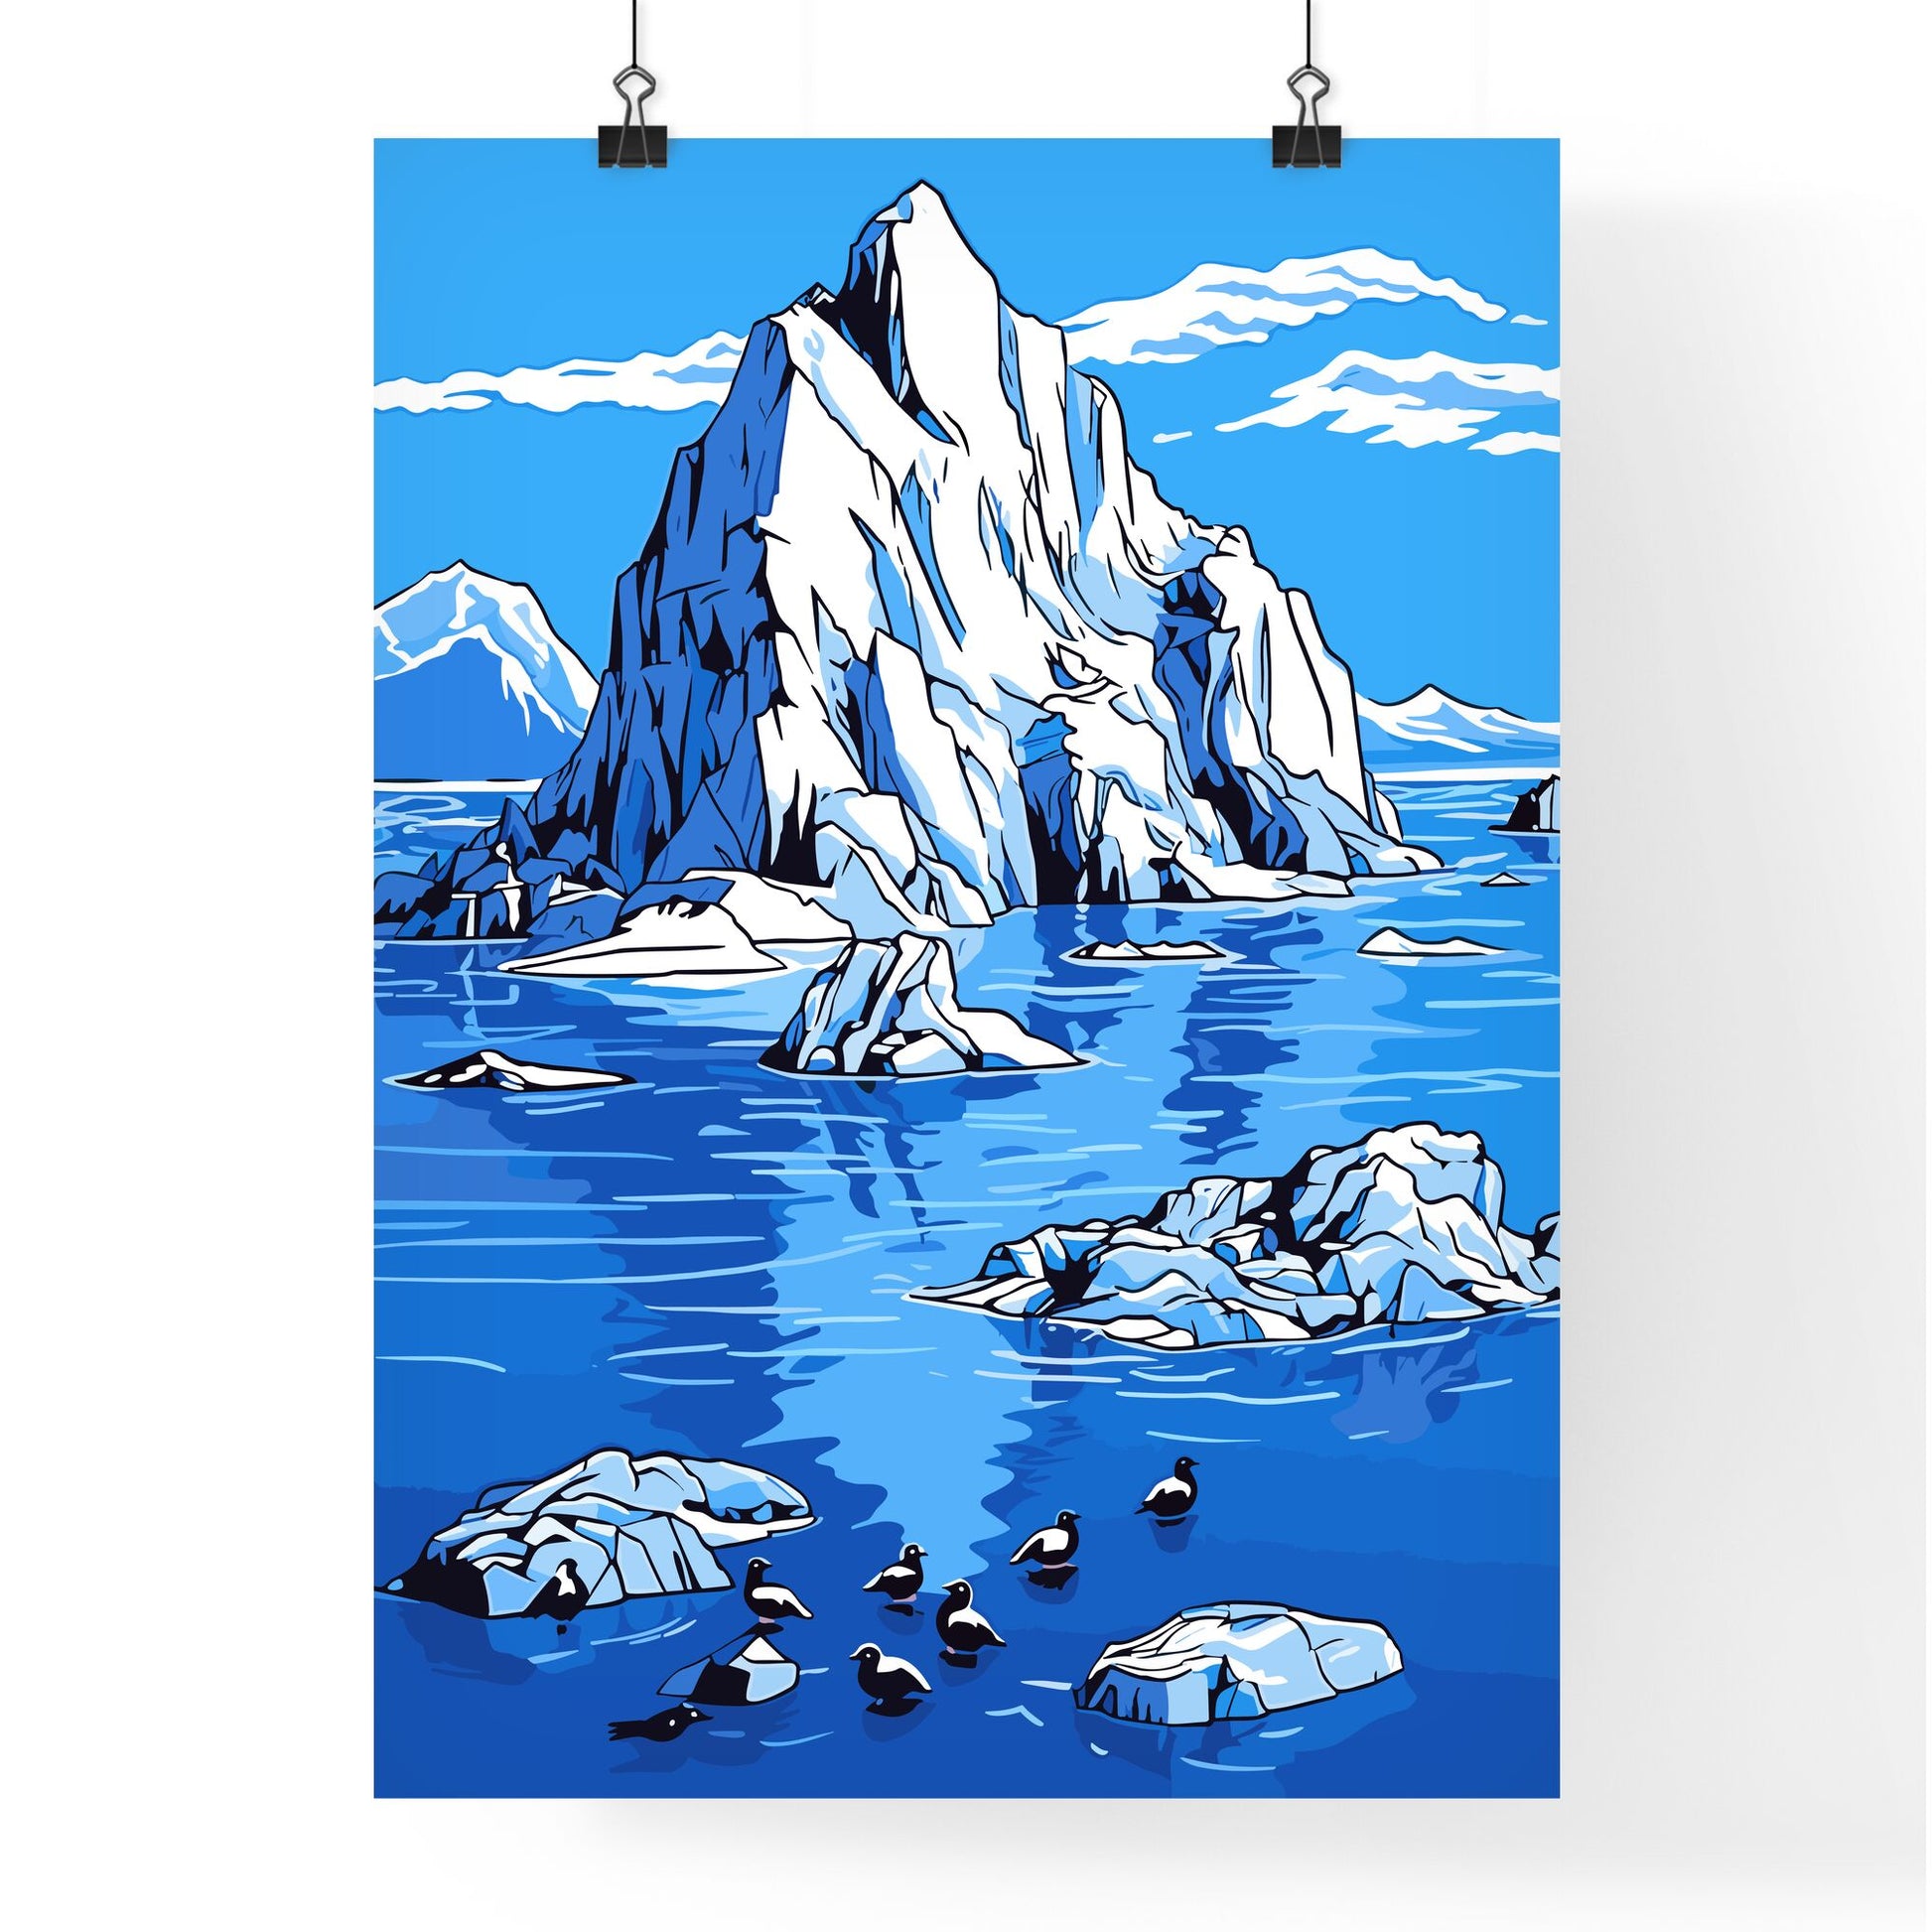 Group Of Penguins With A Blue Iceberg Bay - A Group Of Birds On Icebergs In Water Default Title